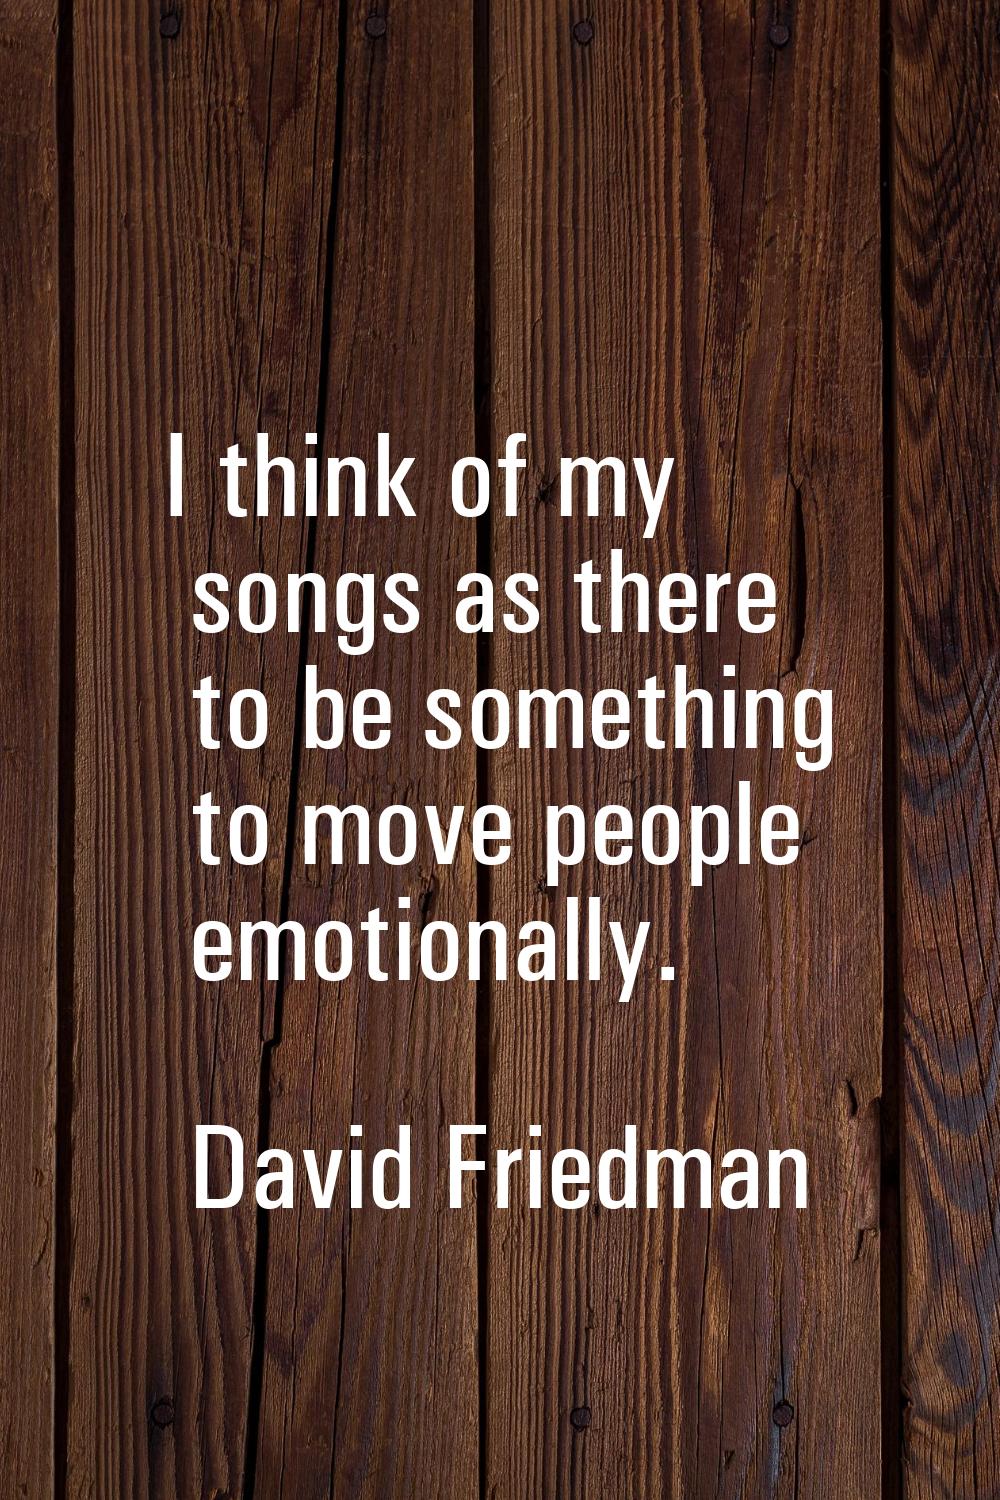 I think of my songs as there to be something to move people emotionally.